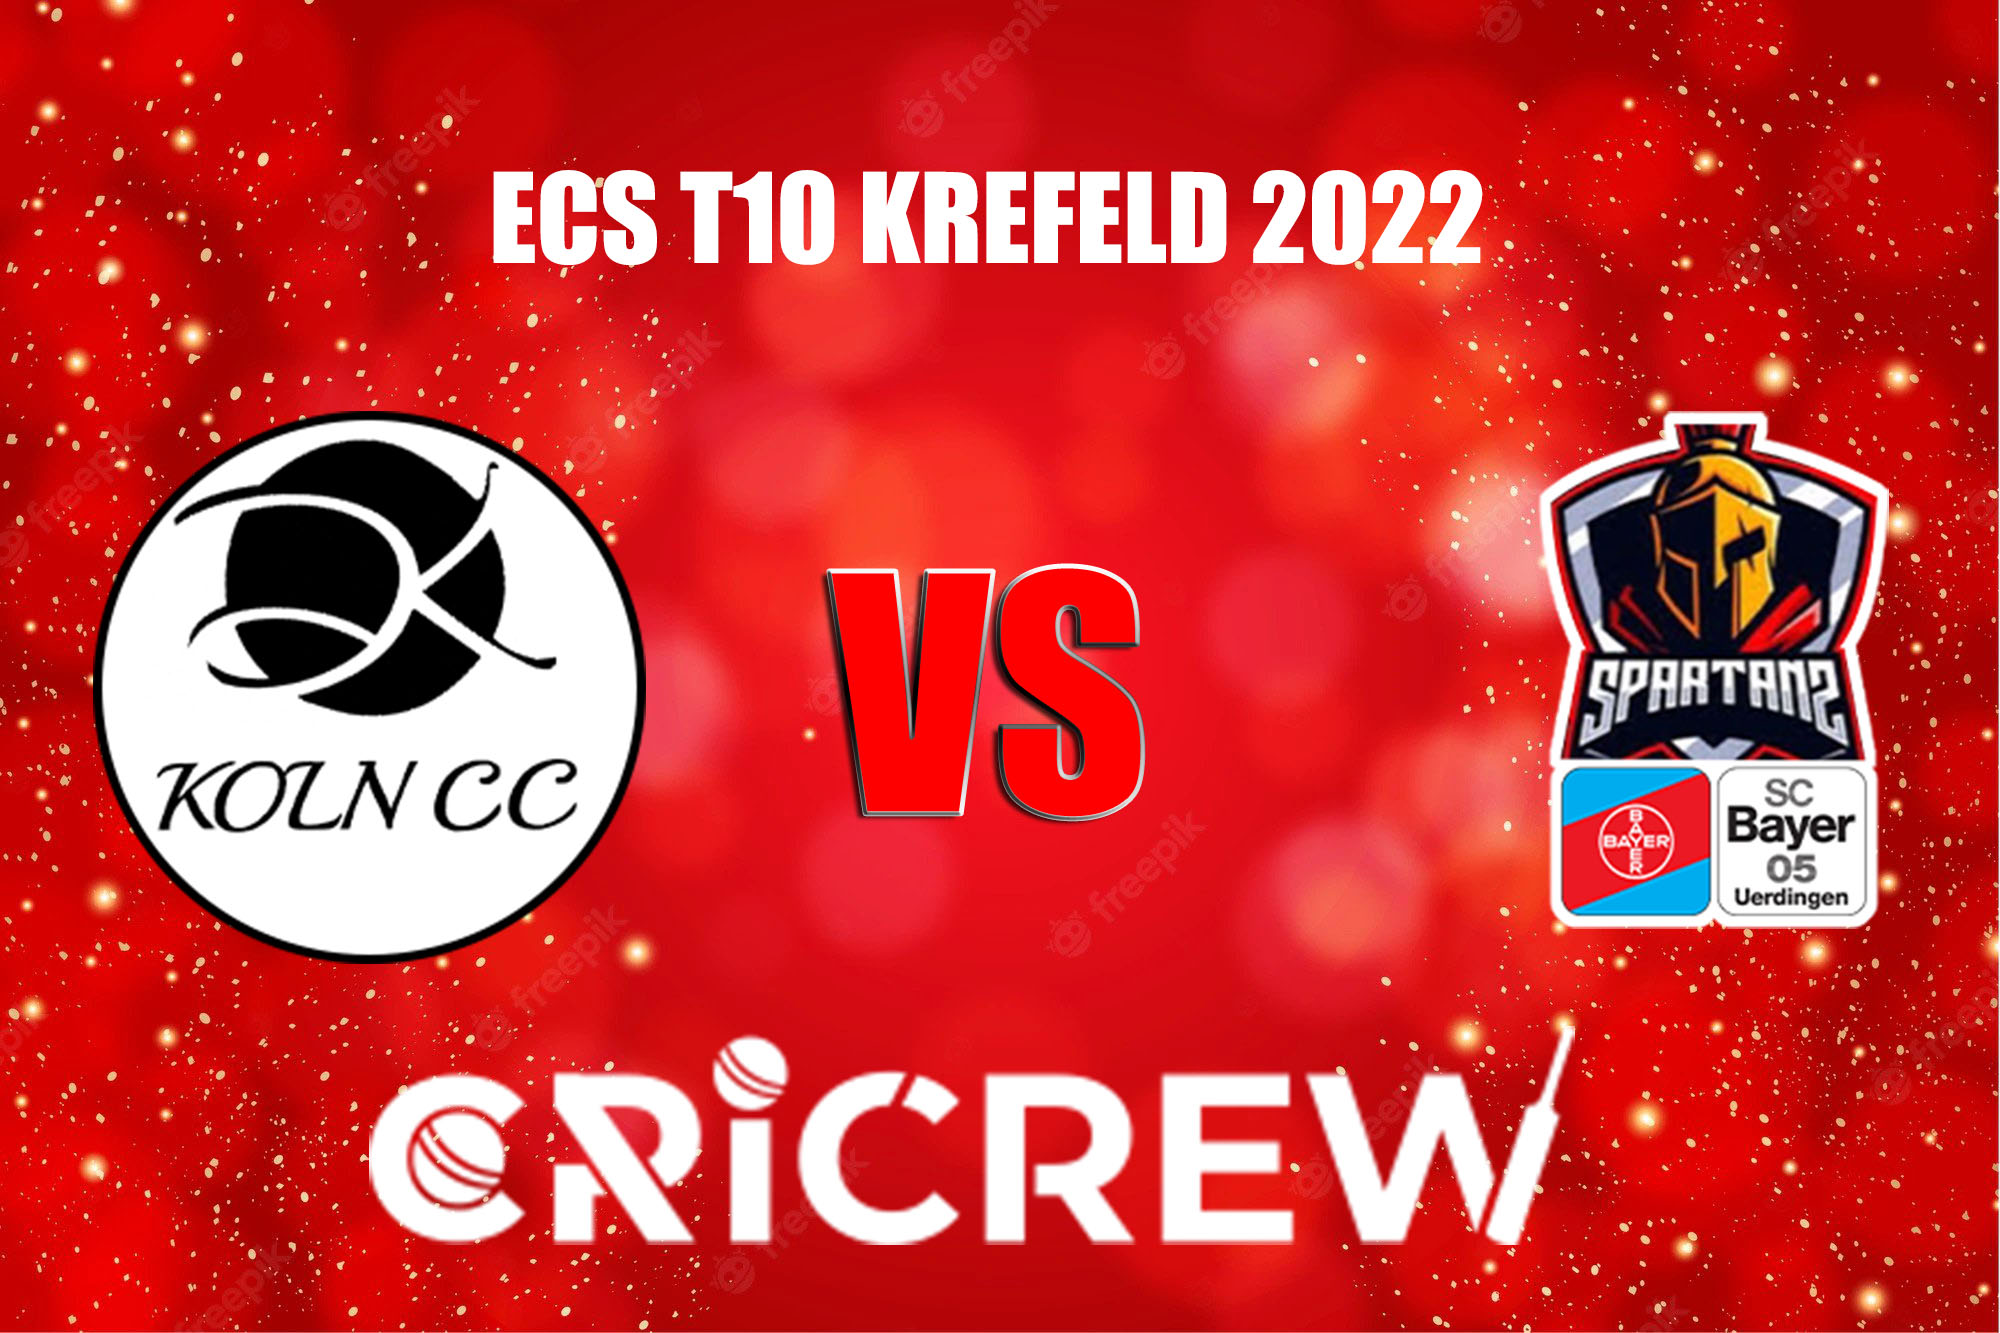 KCC vs BYS Live Score starts on August 27, 2022, 2.00 pm IST at Bayer Uerdingen Cricket Ground, Krefeld. Here on www.cricrew.com you can find all Live, Upcoming